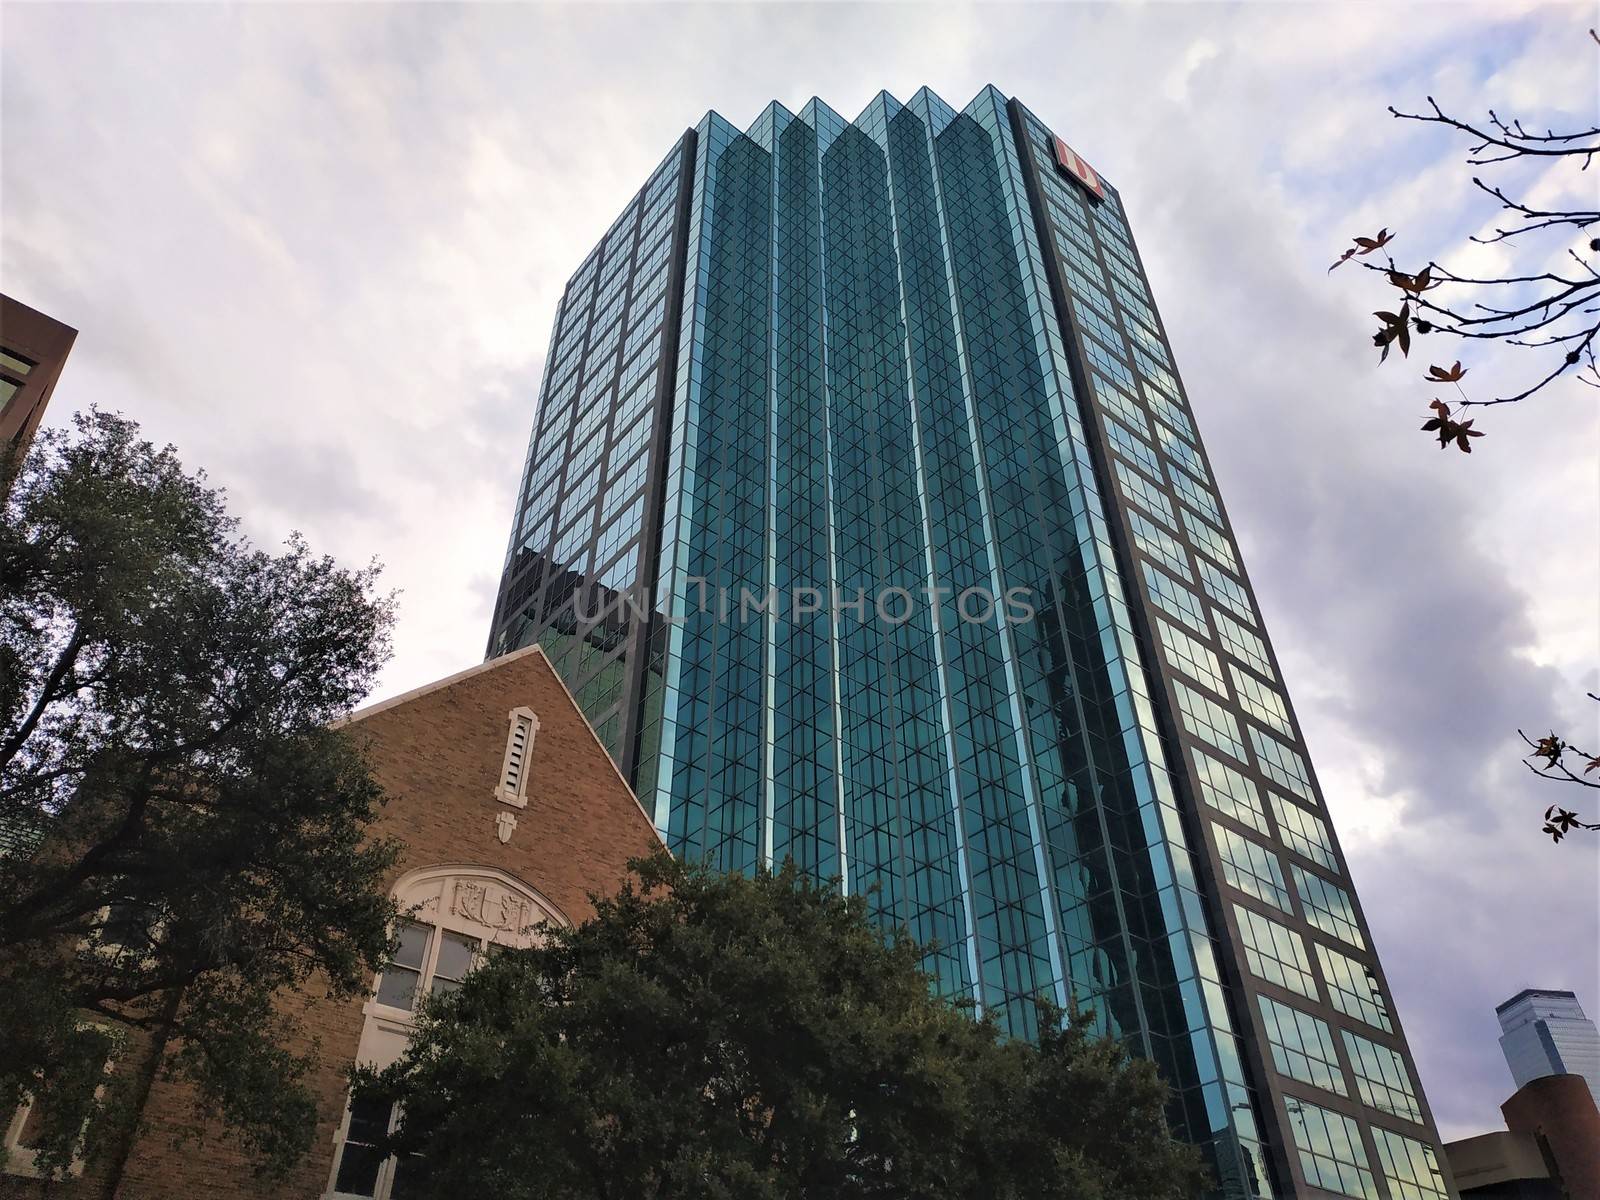 Skyscraper in downtown Dallas from worm's-eye view by pisces2386